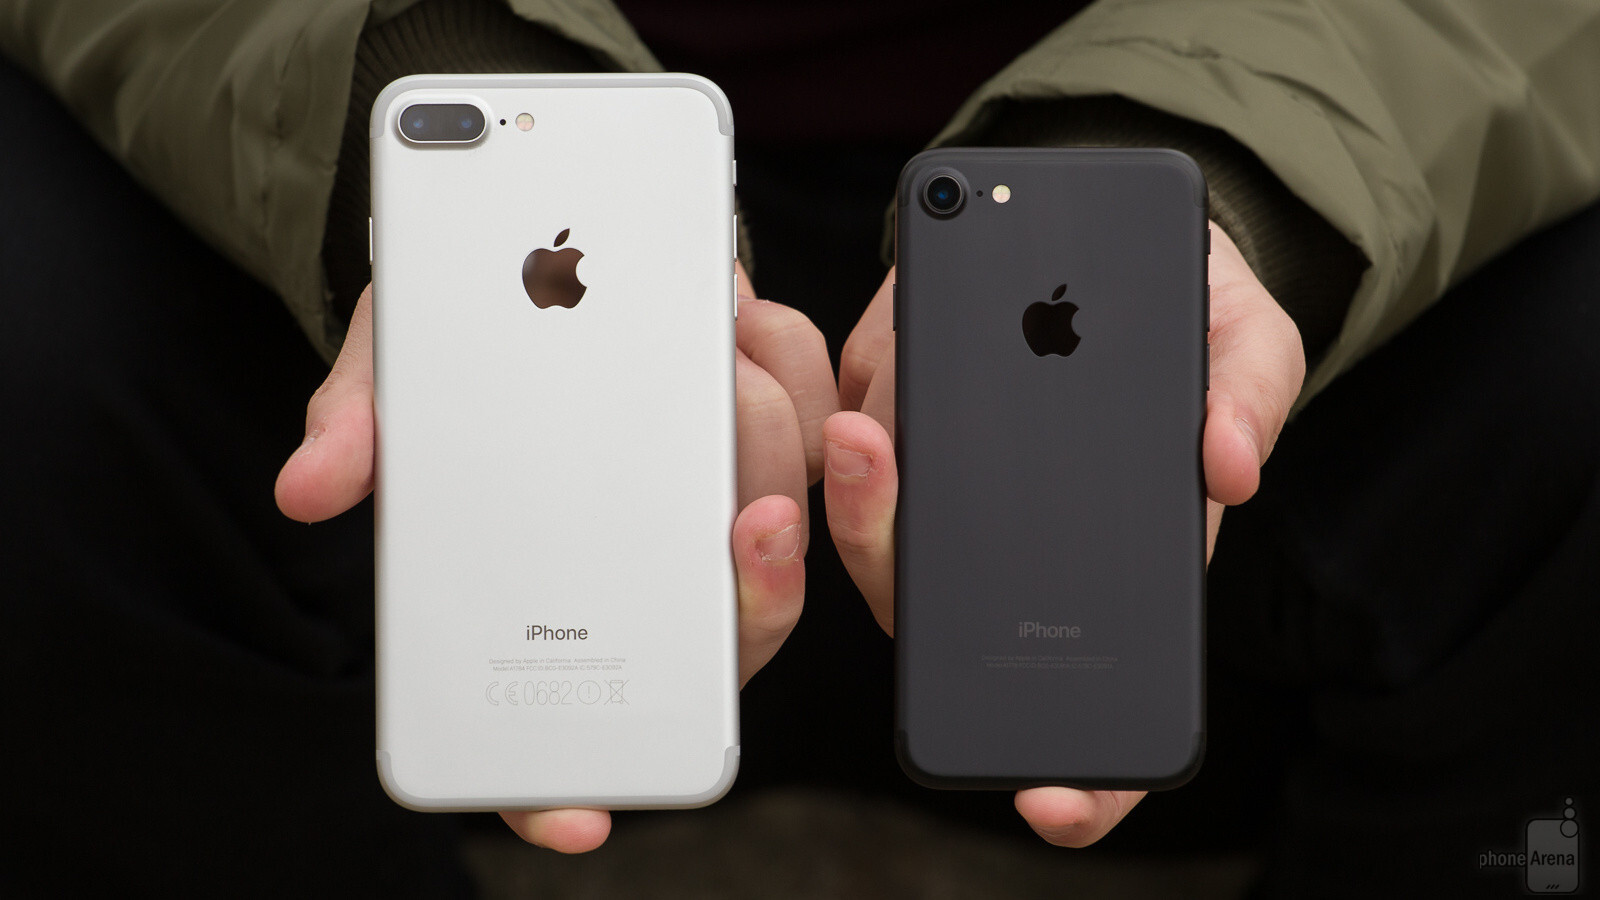 iphone-7-vs-iphone-7-plus-camera-is-it-worth-the-upgrade